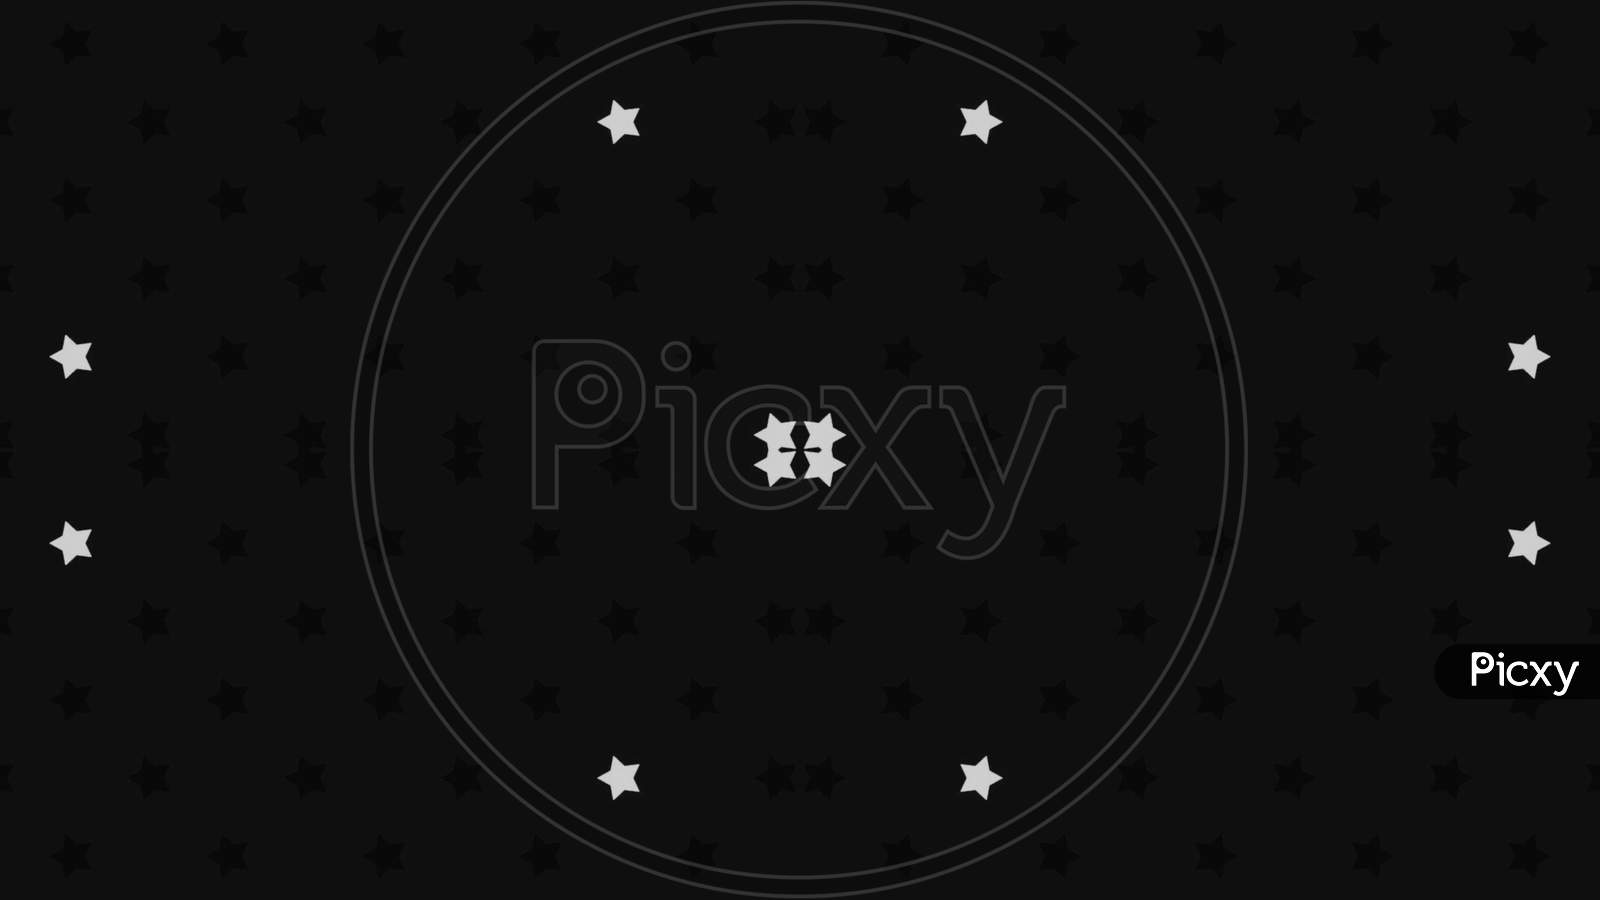 A creative design abstract in black background